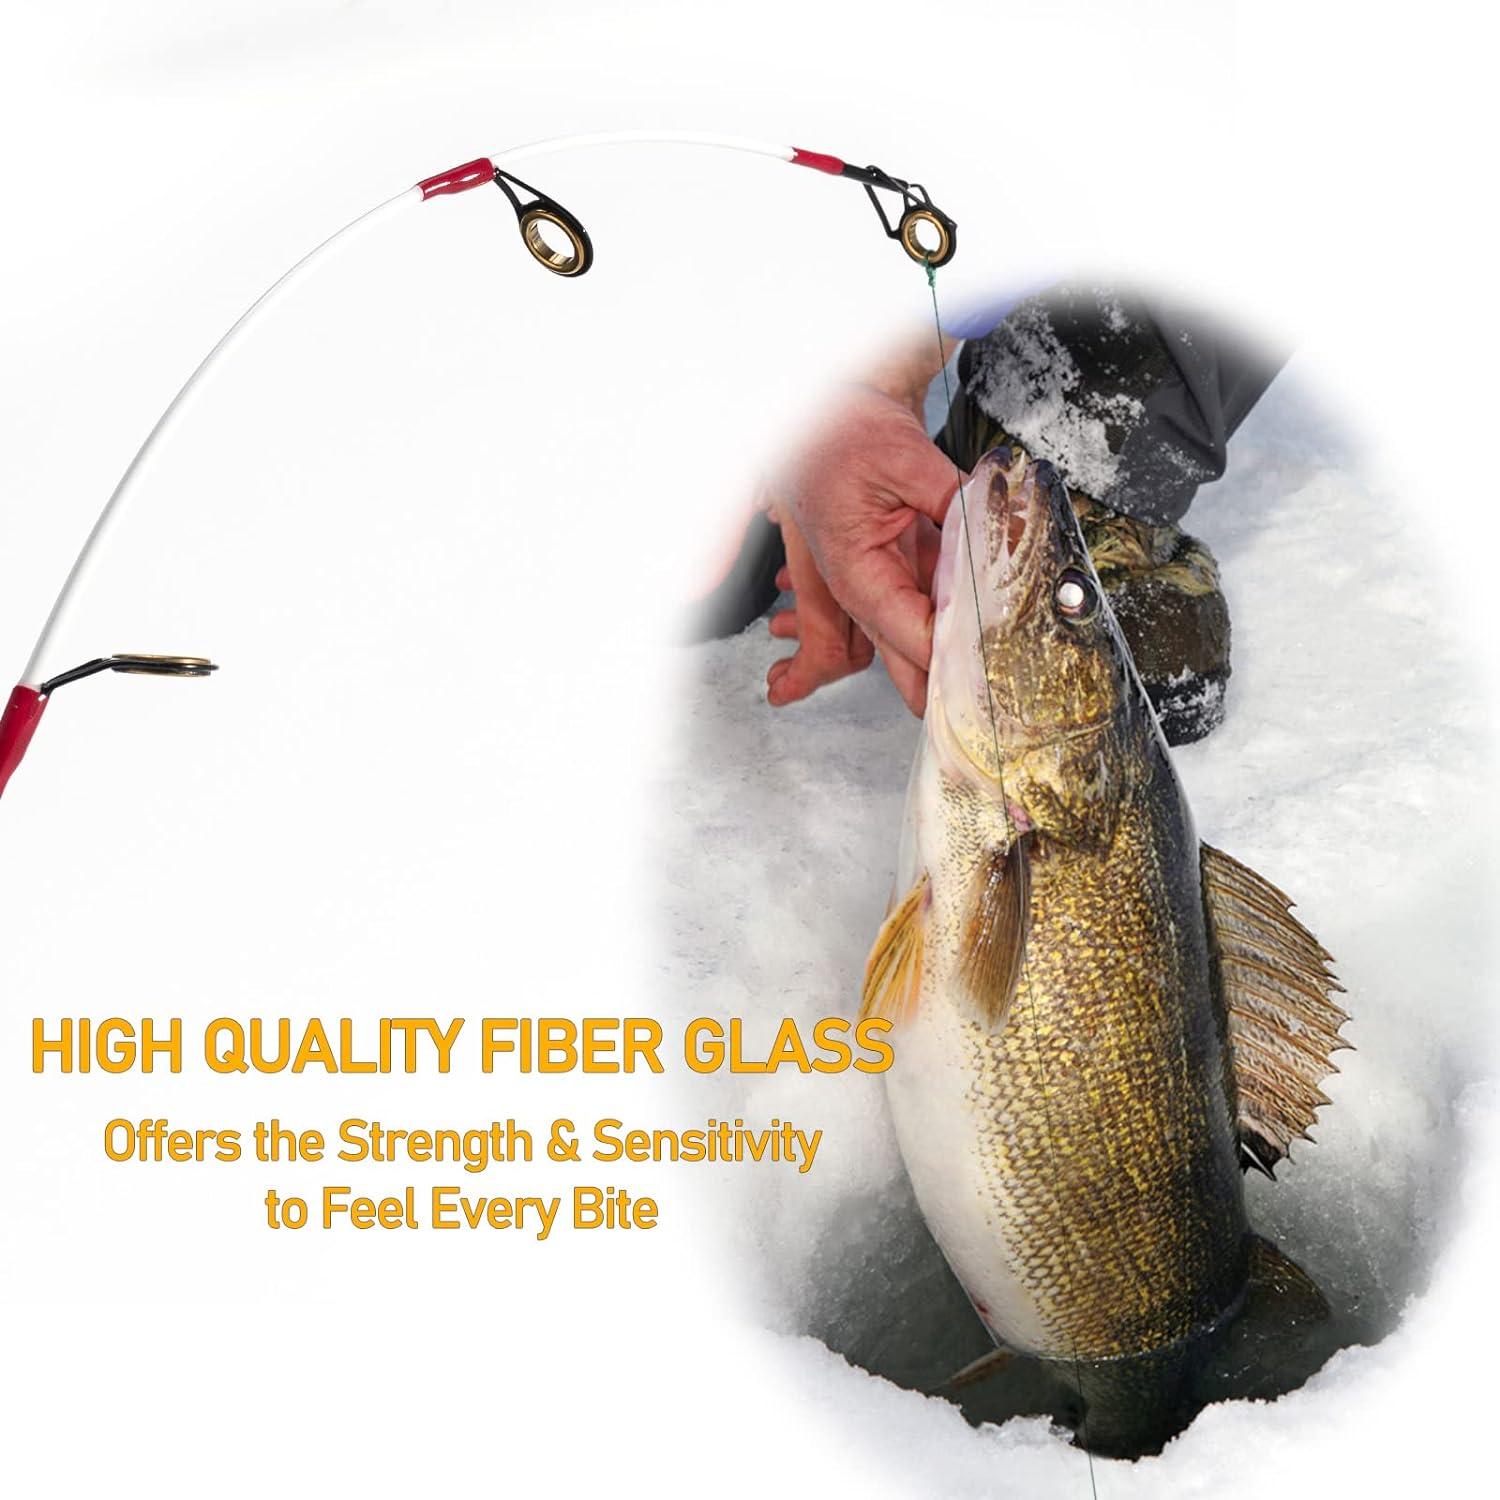 QualyQualy Ice Fishing Rod and Reel Combo Full Ice Fishing Rod Kit with  Backpack Seat Ice Cleats Ice Fishing Jigs Ice Fishing Gear for Men and  Kids, Rod & Reel Combos 